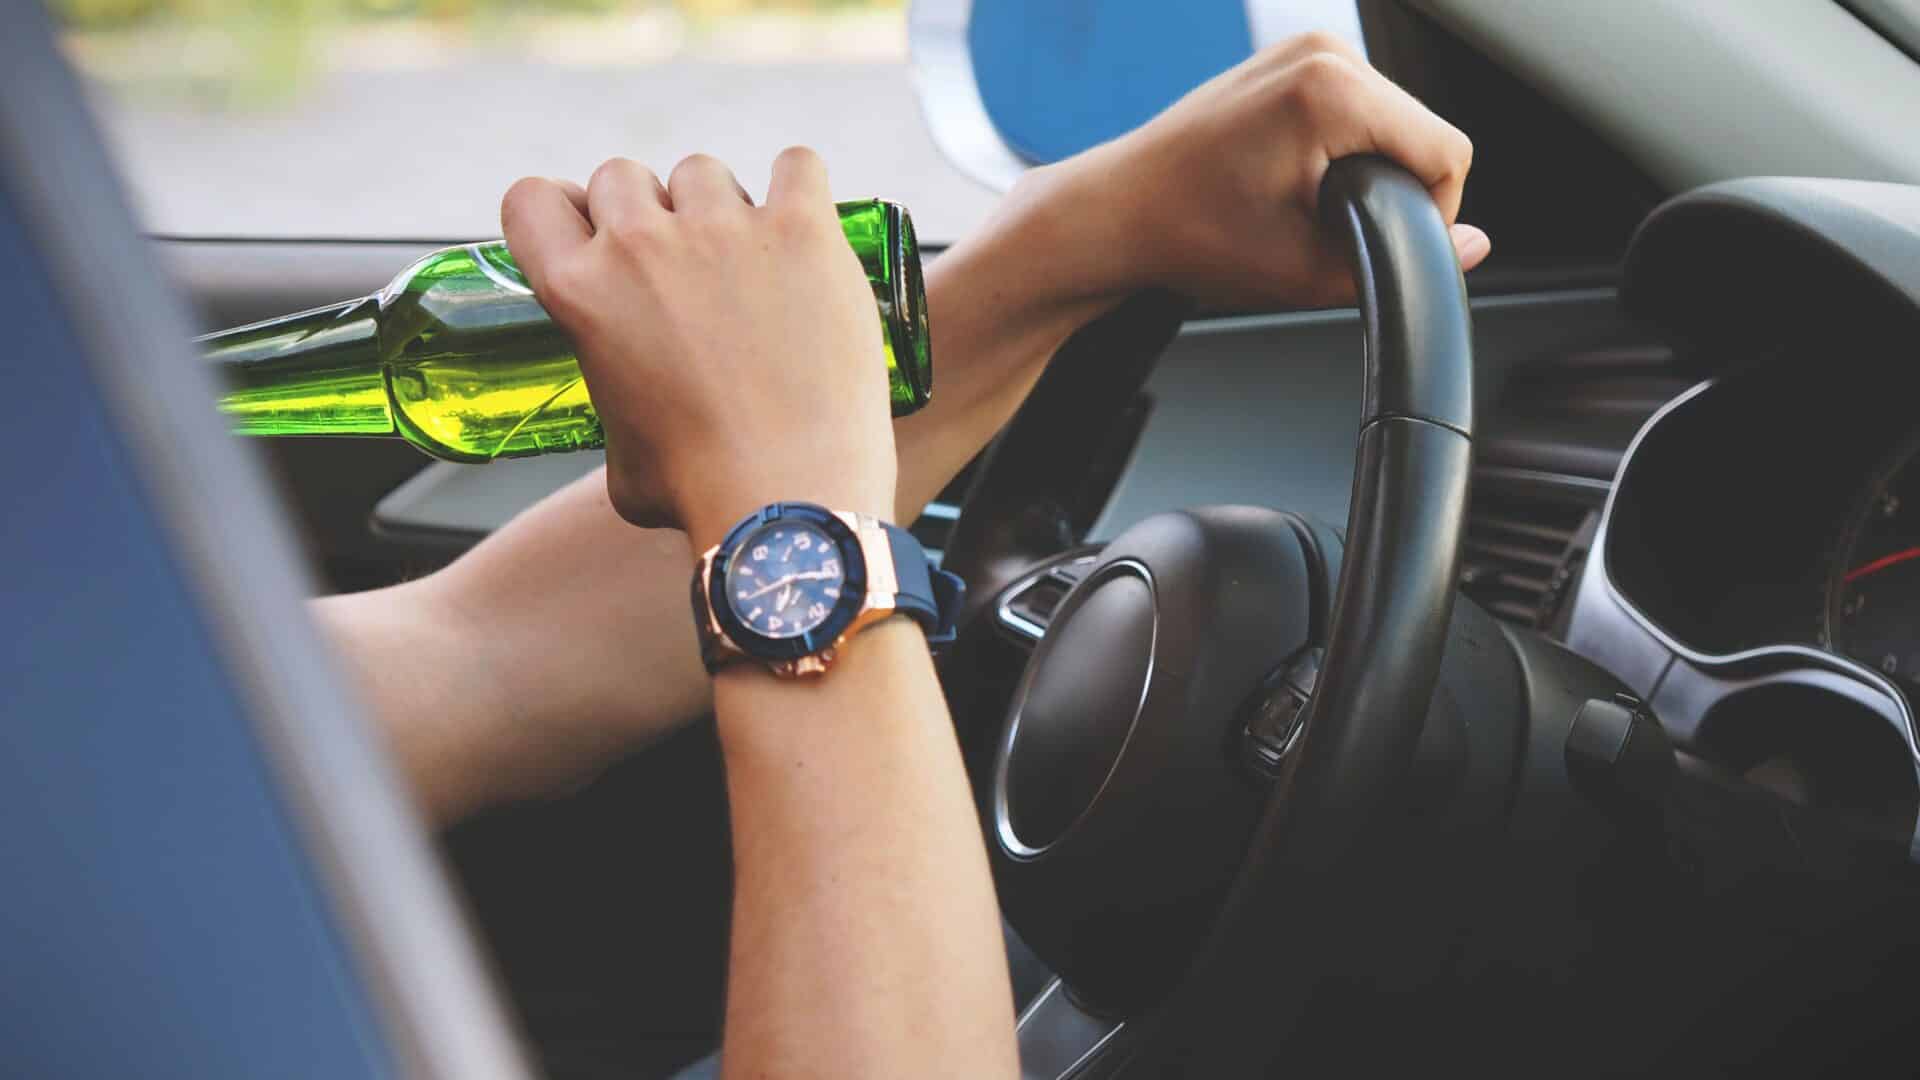 A person drinking while driving. Not recommended by DUI Accident Lawyers in Arizona